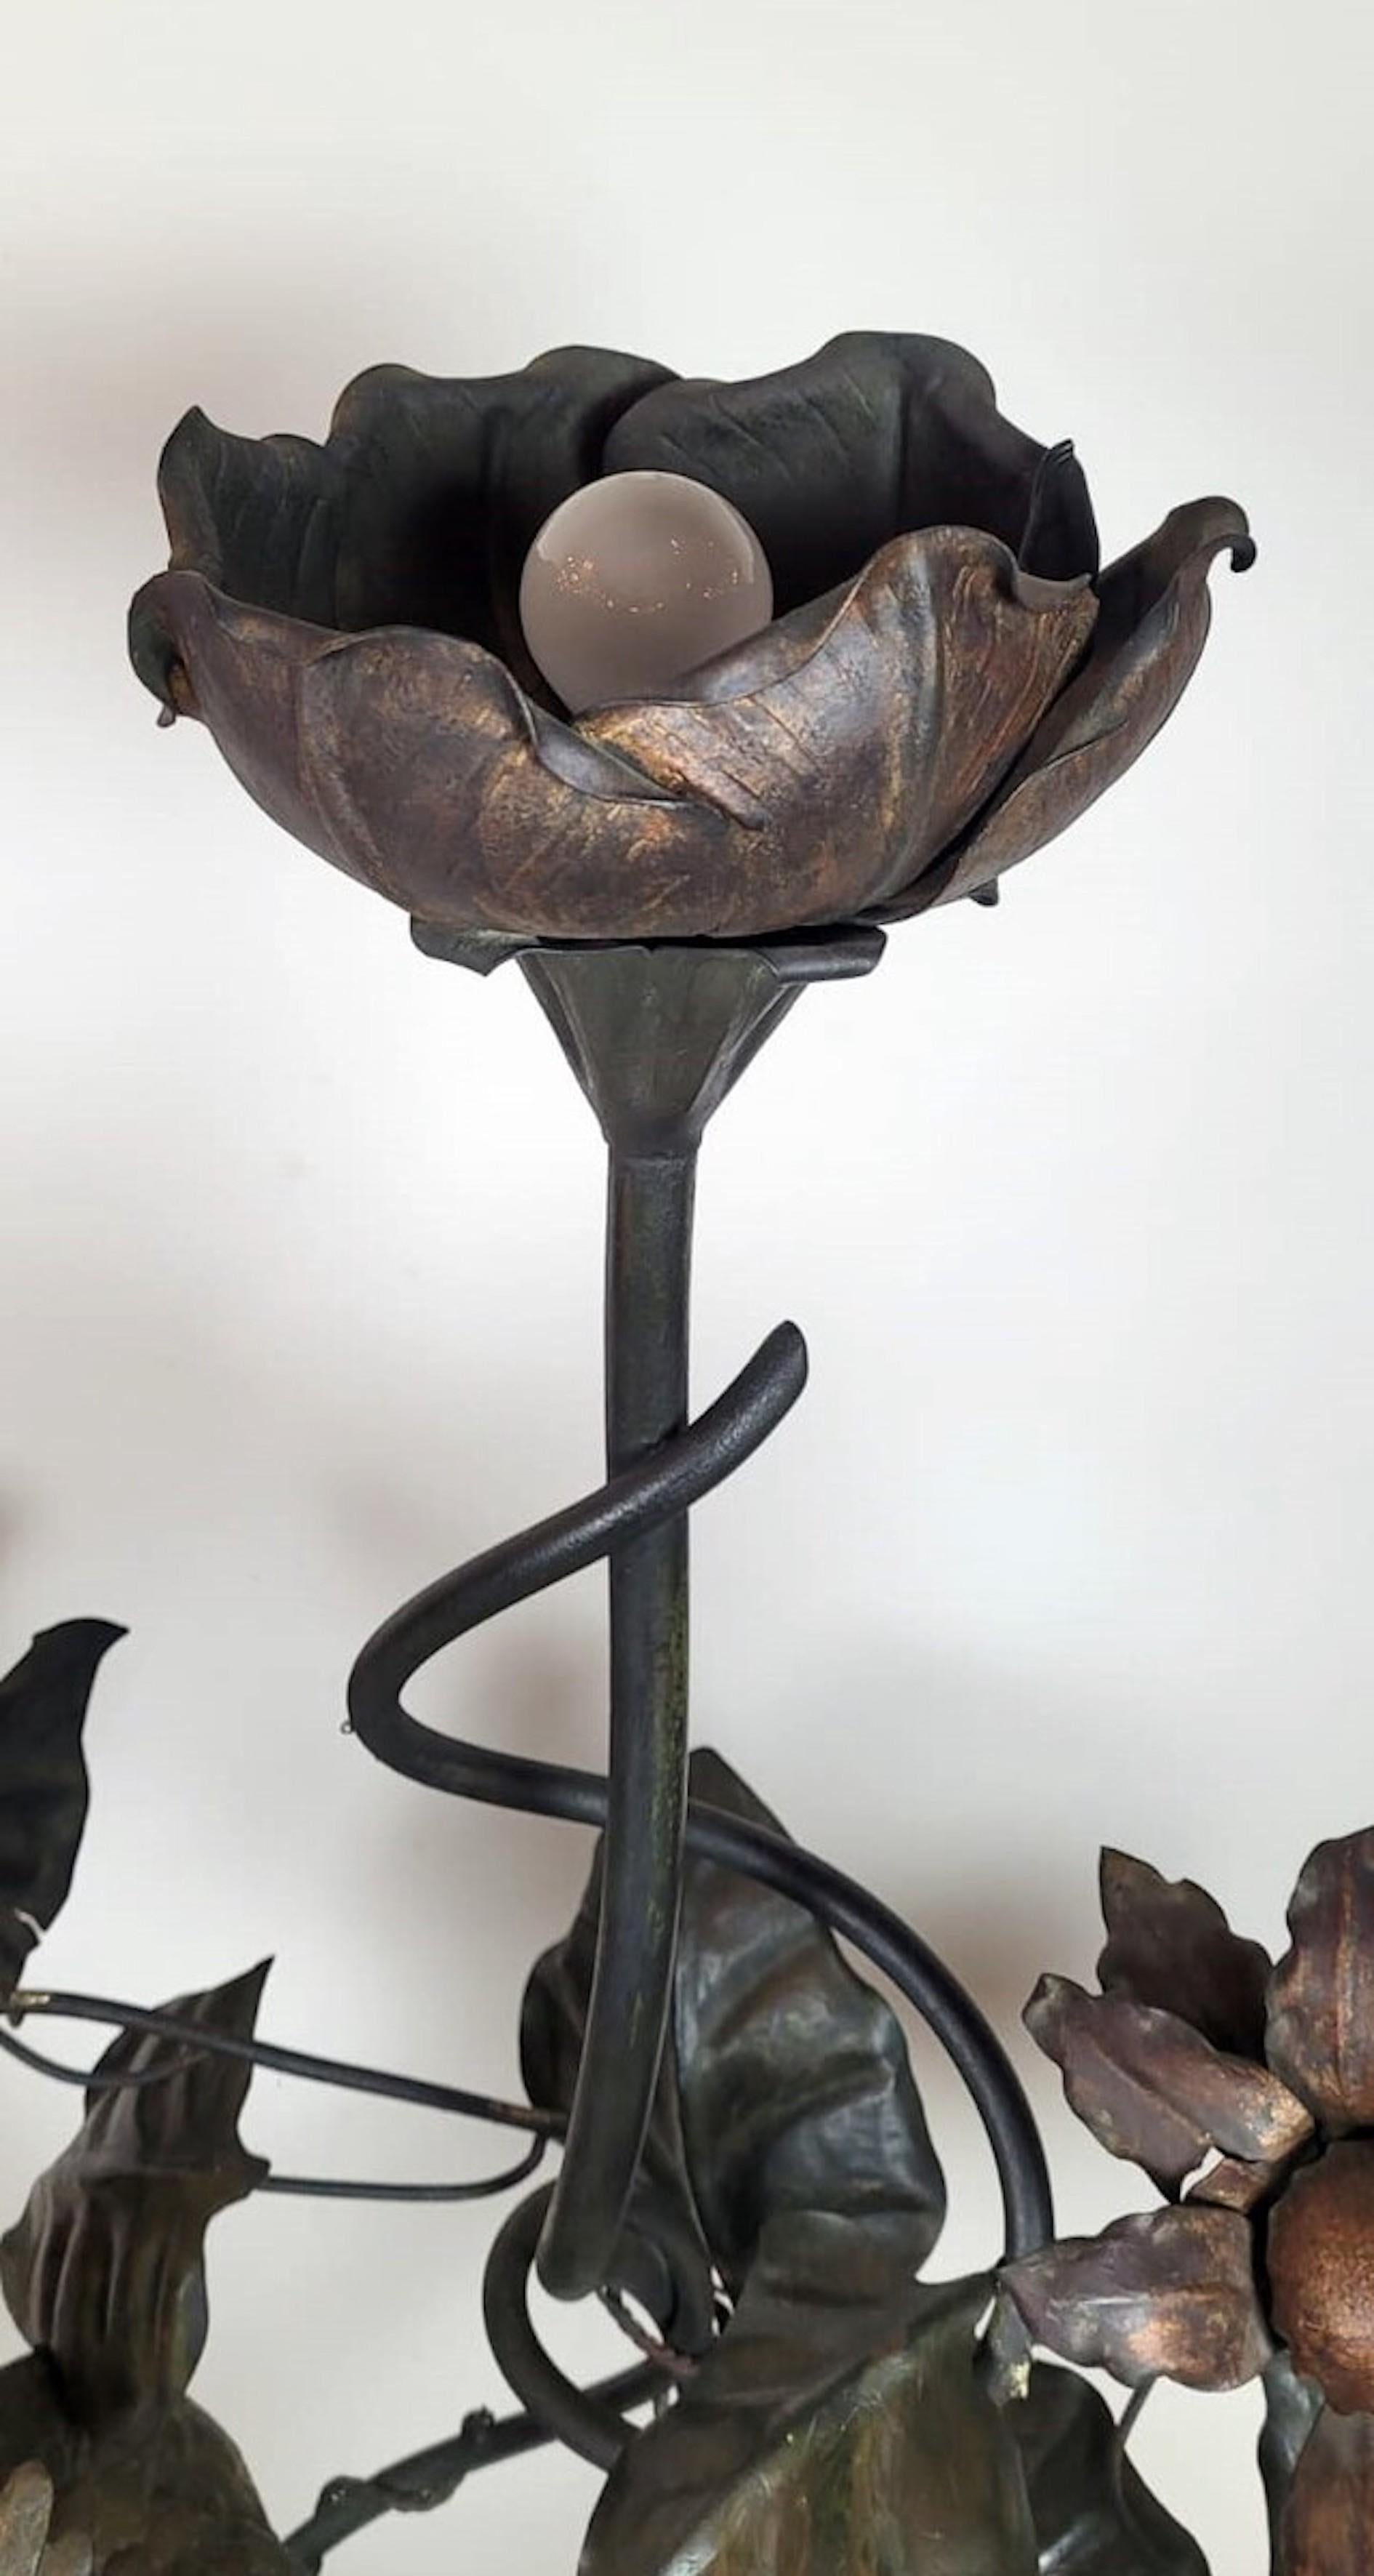 Mid-20th Century Wrought Iron Floor Lamp - Decorations With Leaves, Flowers, And Parrot For Sale